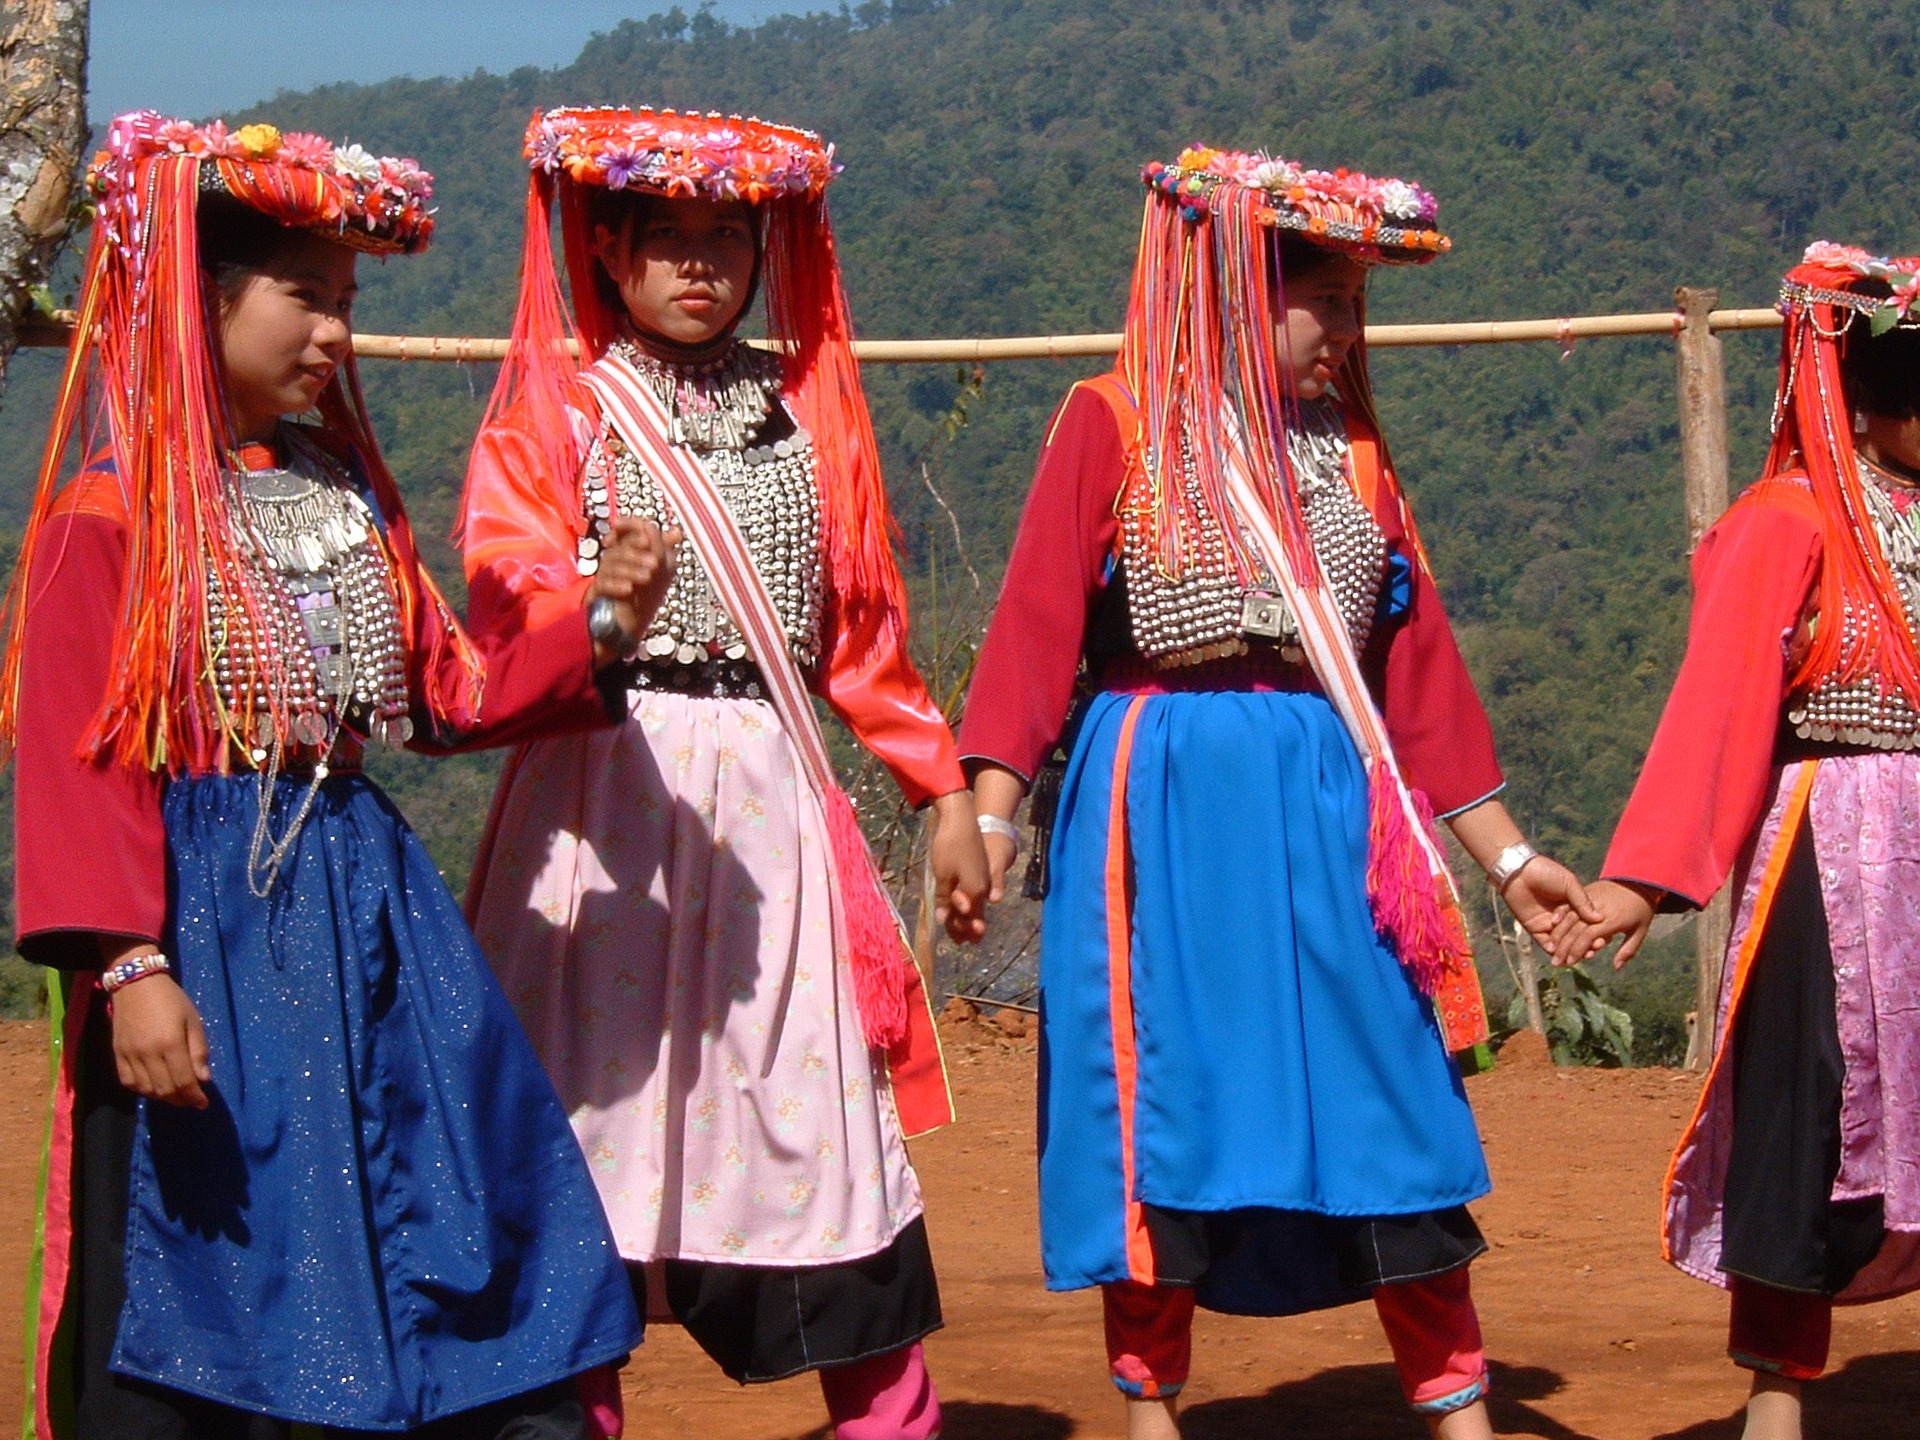 Women of a tribe in traditional dress